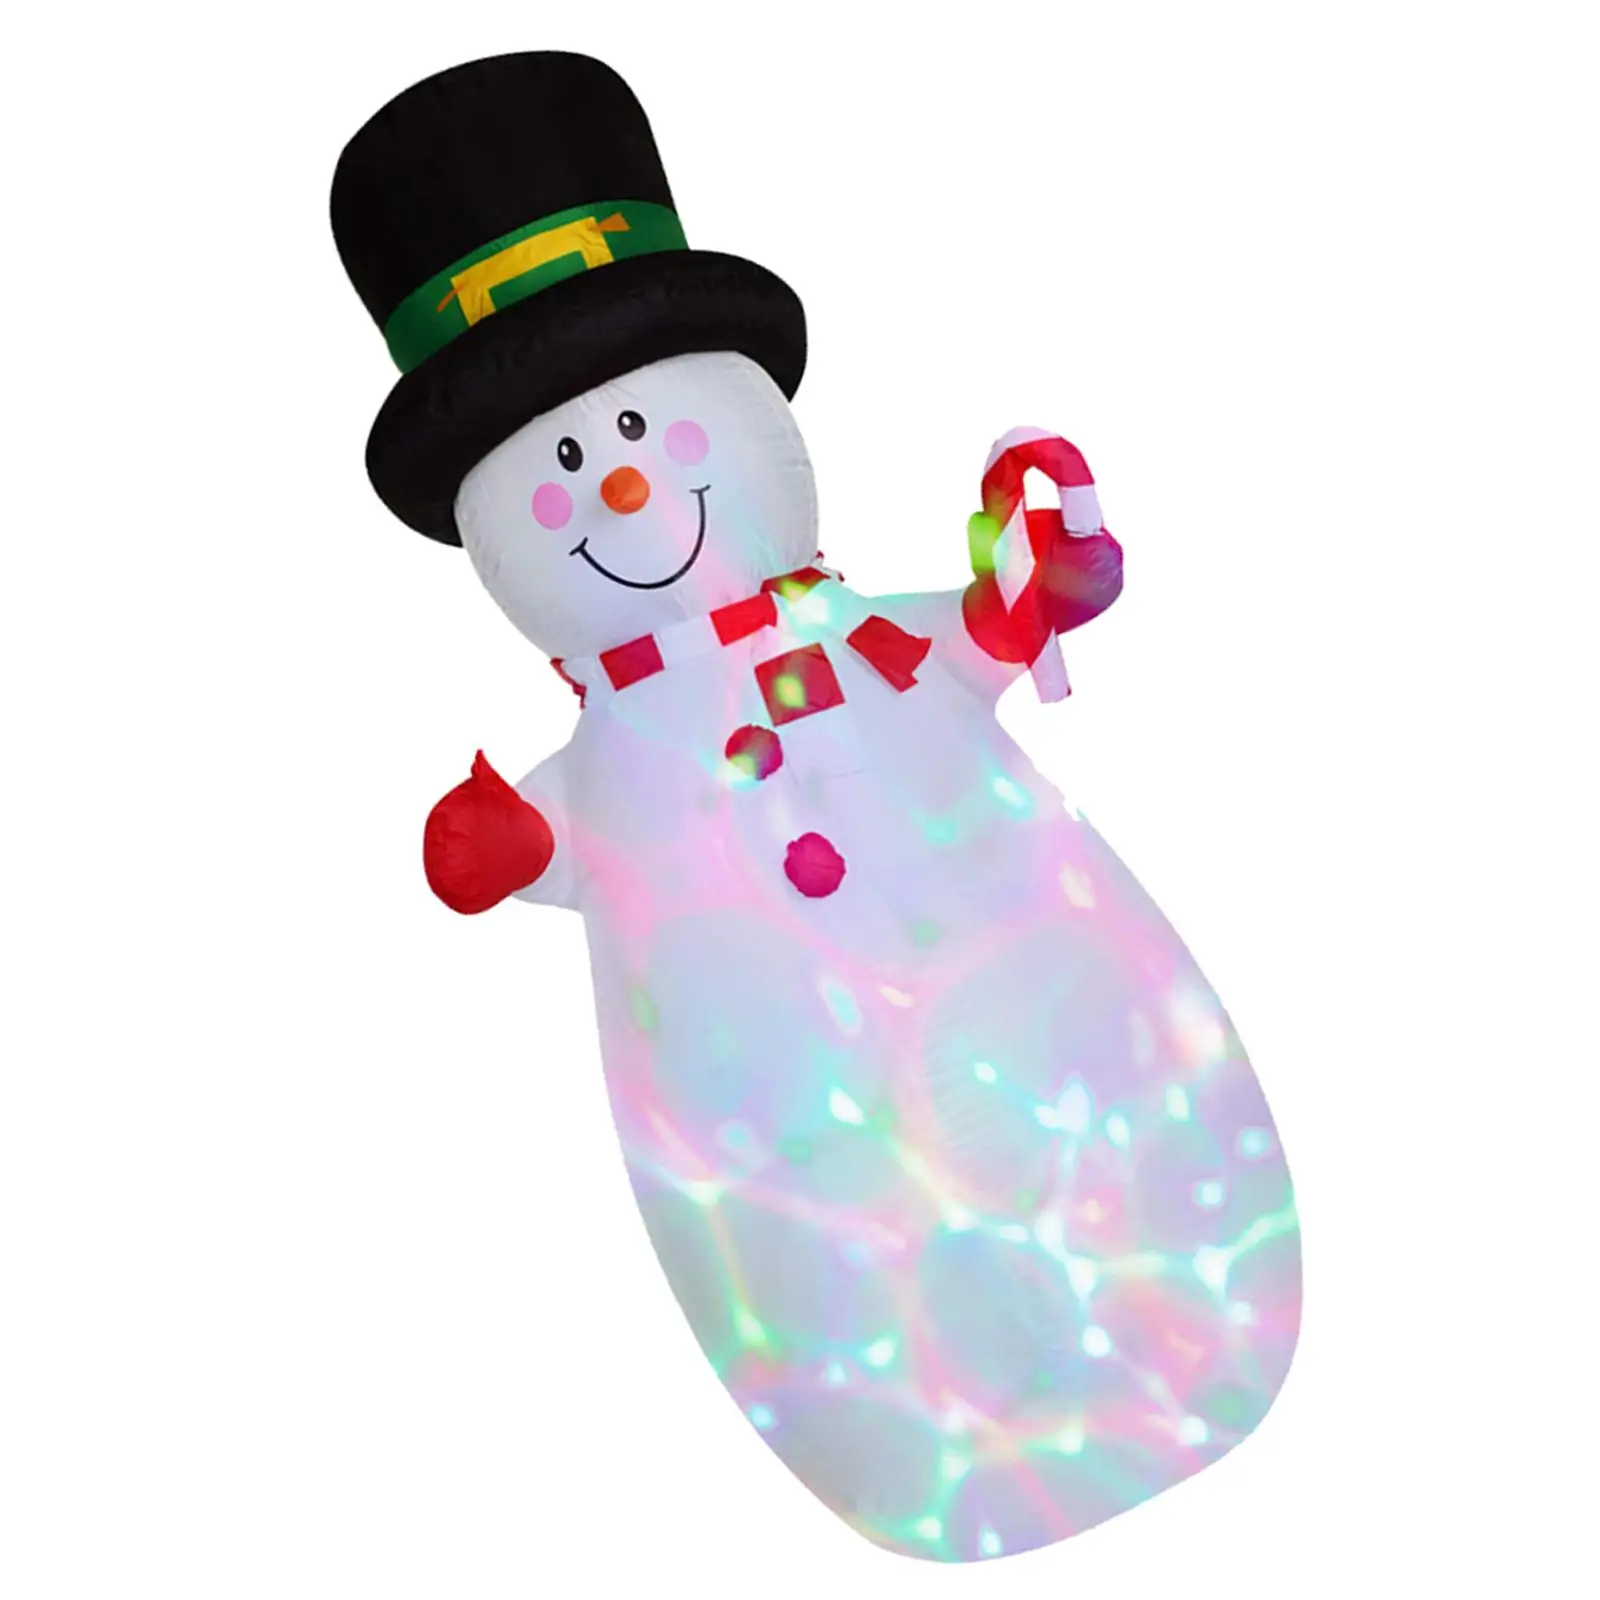 1.8 Meters Xmas Inflatable Snowman with Stakes Holiday Inflatable Snowman for Garden Lawn Holiday